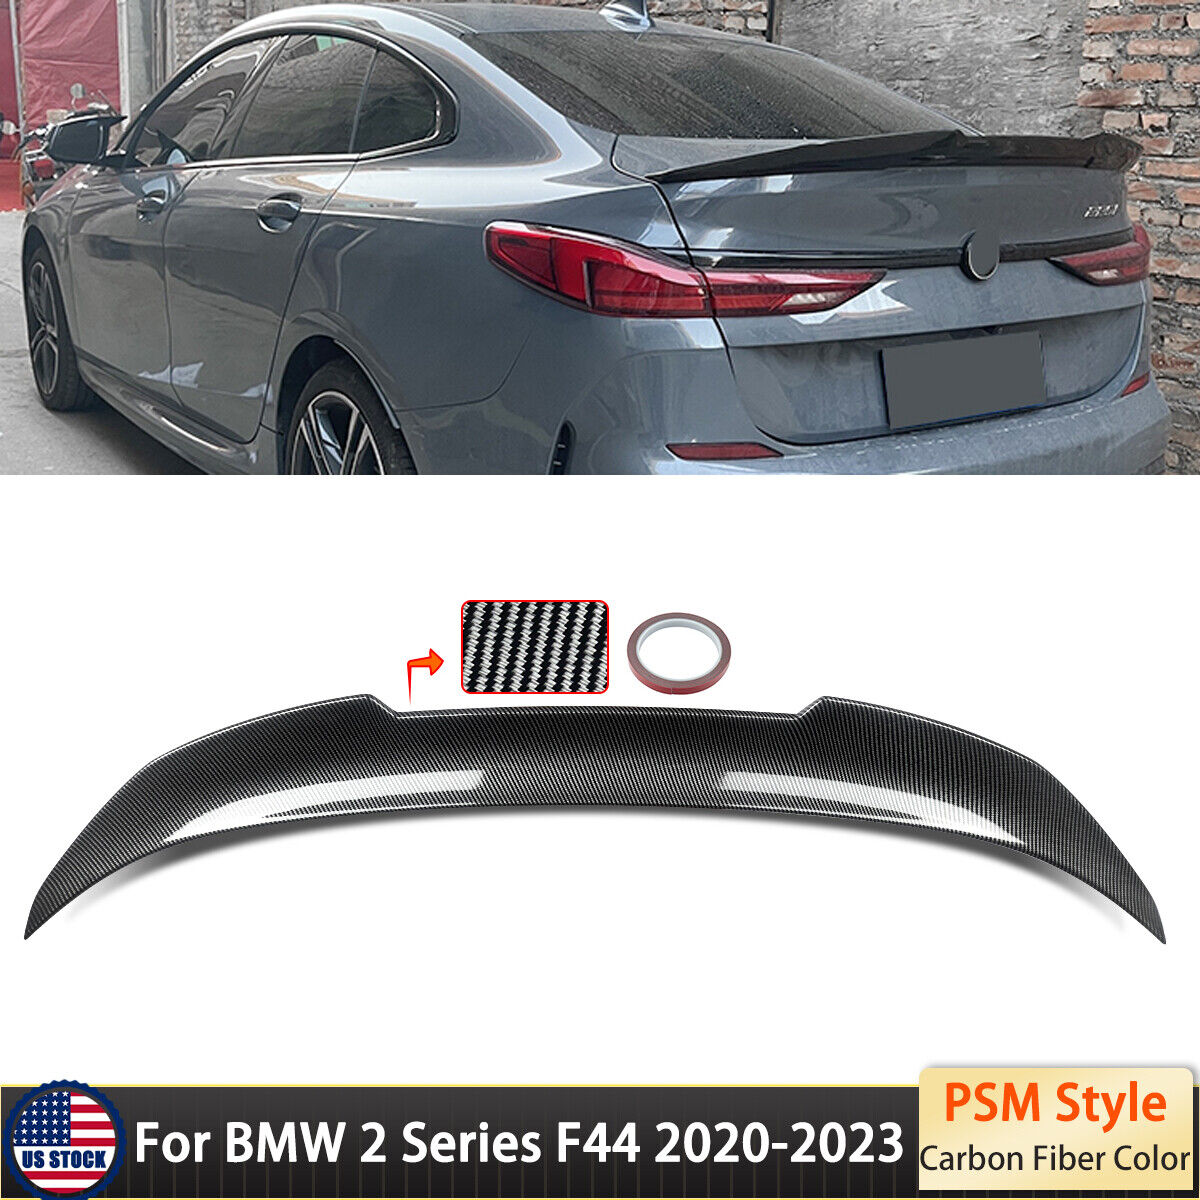 For 2020-23 BMW F44 228i M235i Gran Coupe PSM Style Highkick Trunk Spoiler